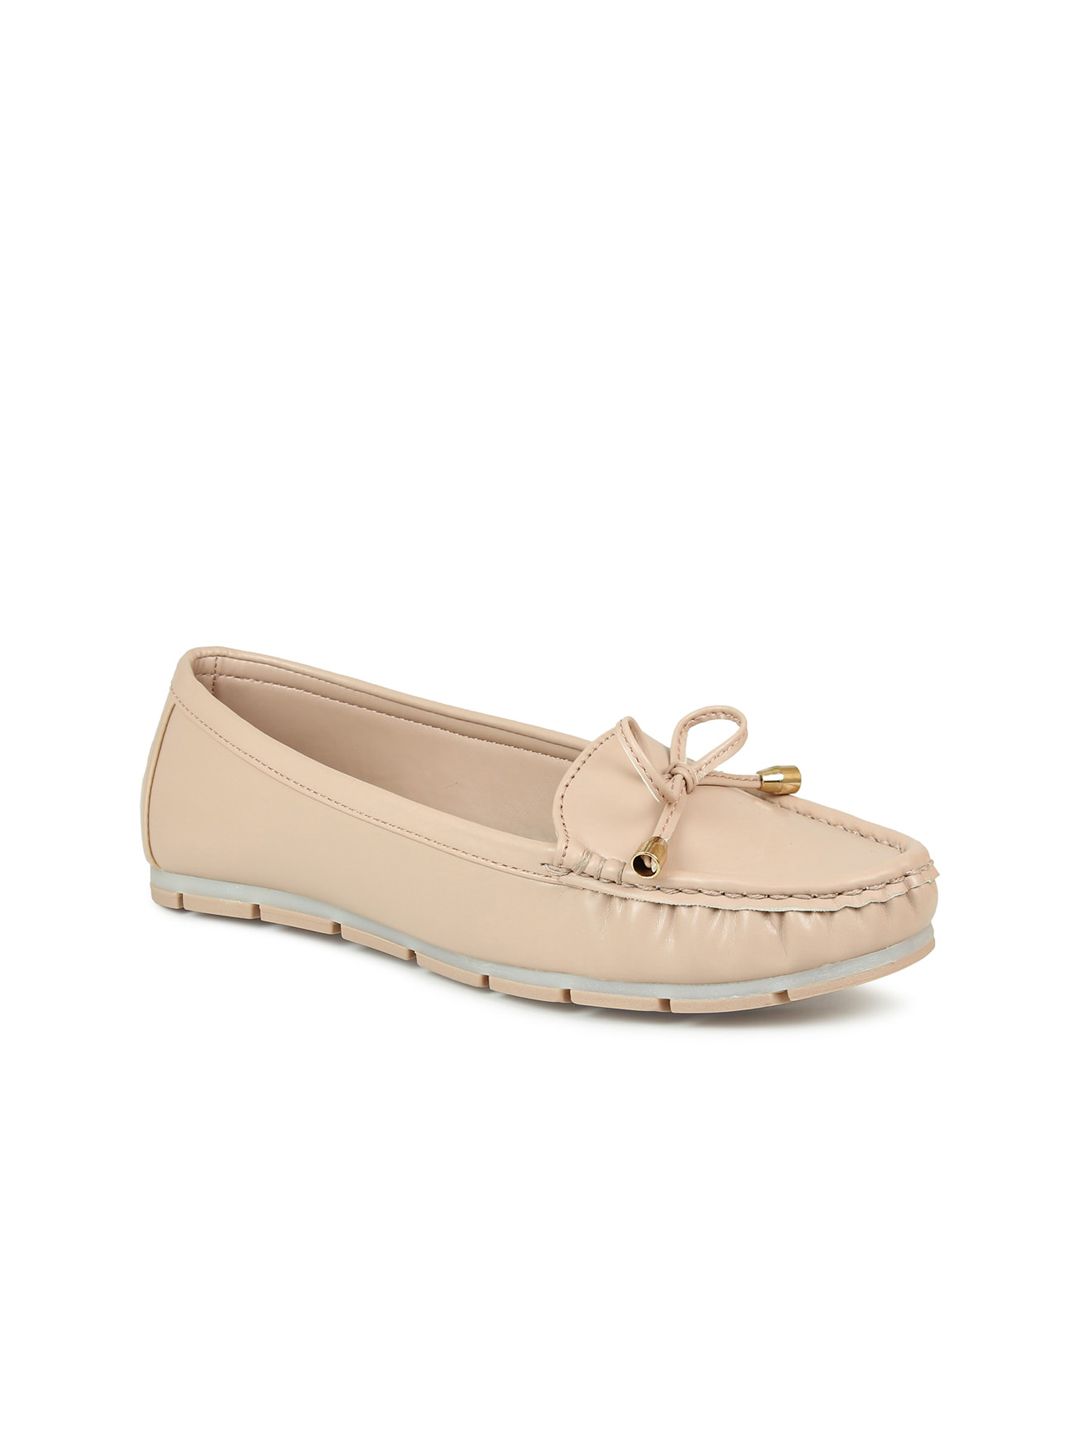 Inc 5 Women Synthetic Loafers Price in India